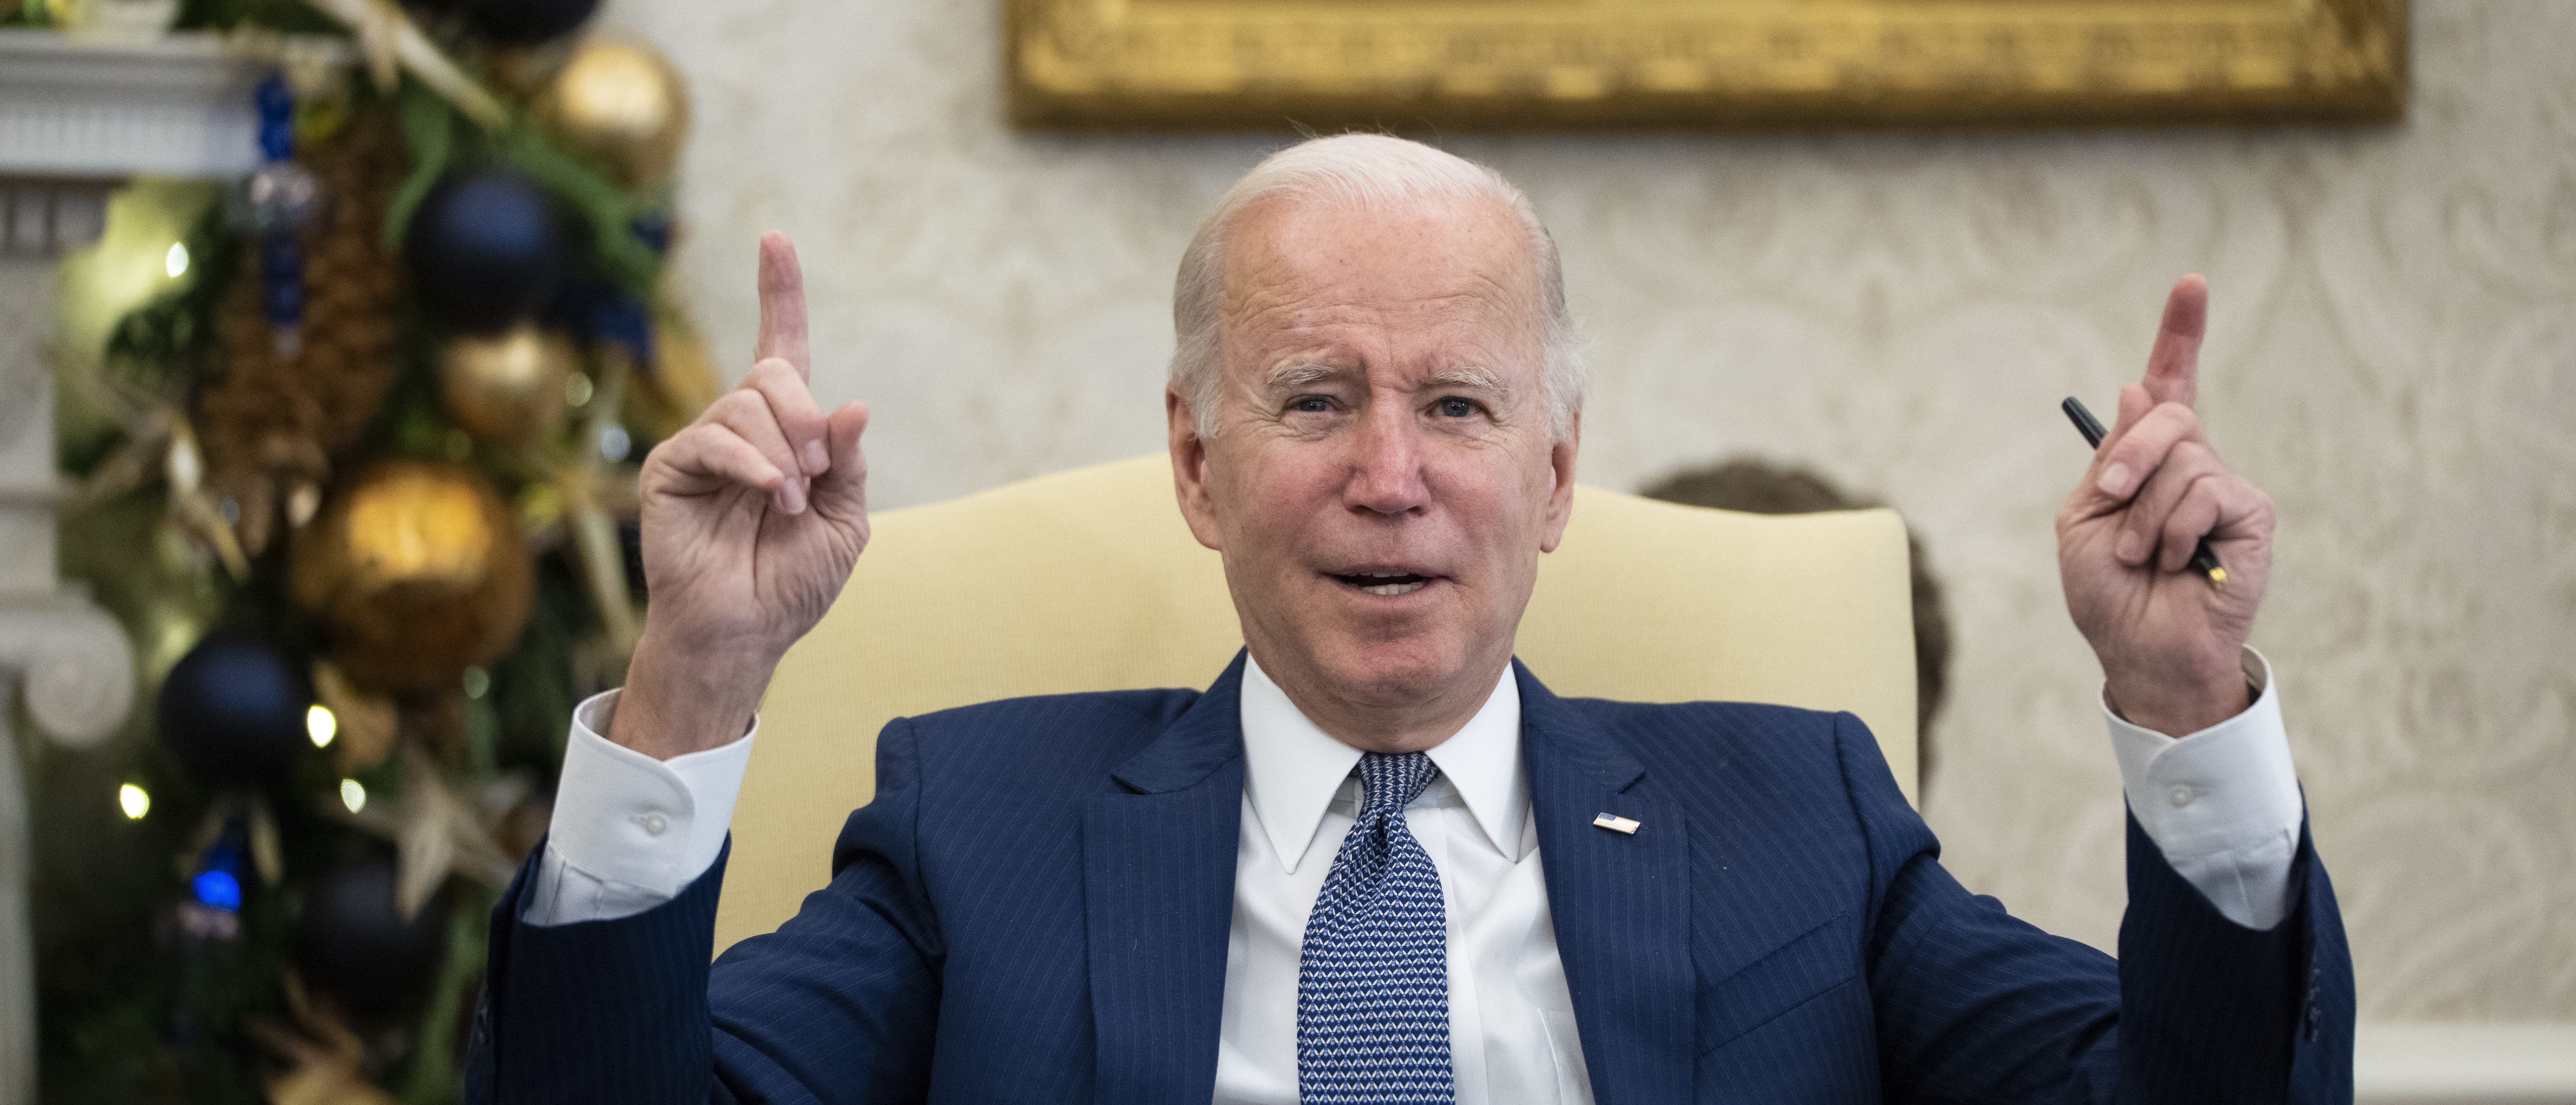 Biden Applauds New COVID-19 Pill Data But Cautions That ‘Several Steps Remain’